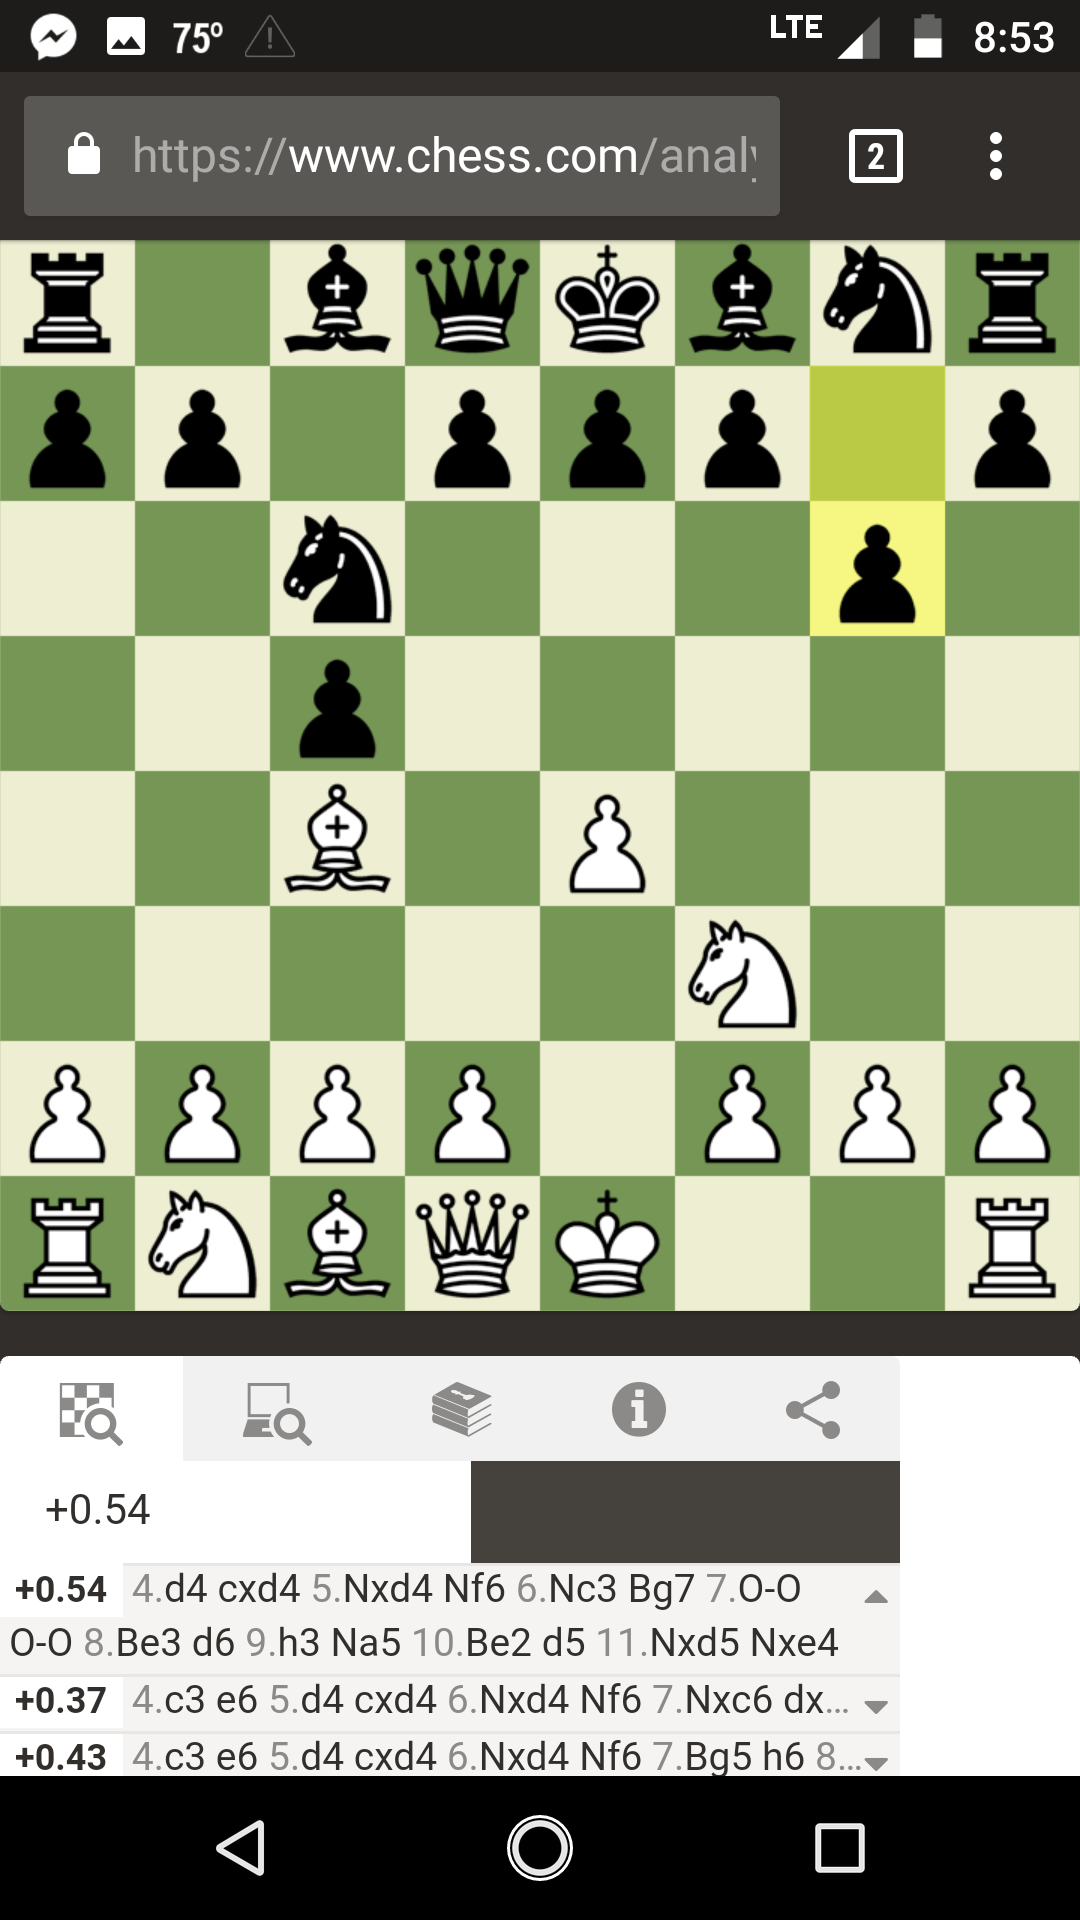 Bowdler Sicilian -  calls early d5 an inaccuracy but Stockfish  likes it. Which is right? - Chess Forums 